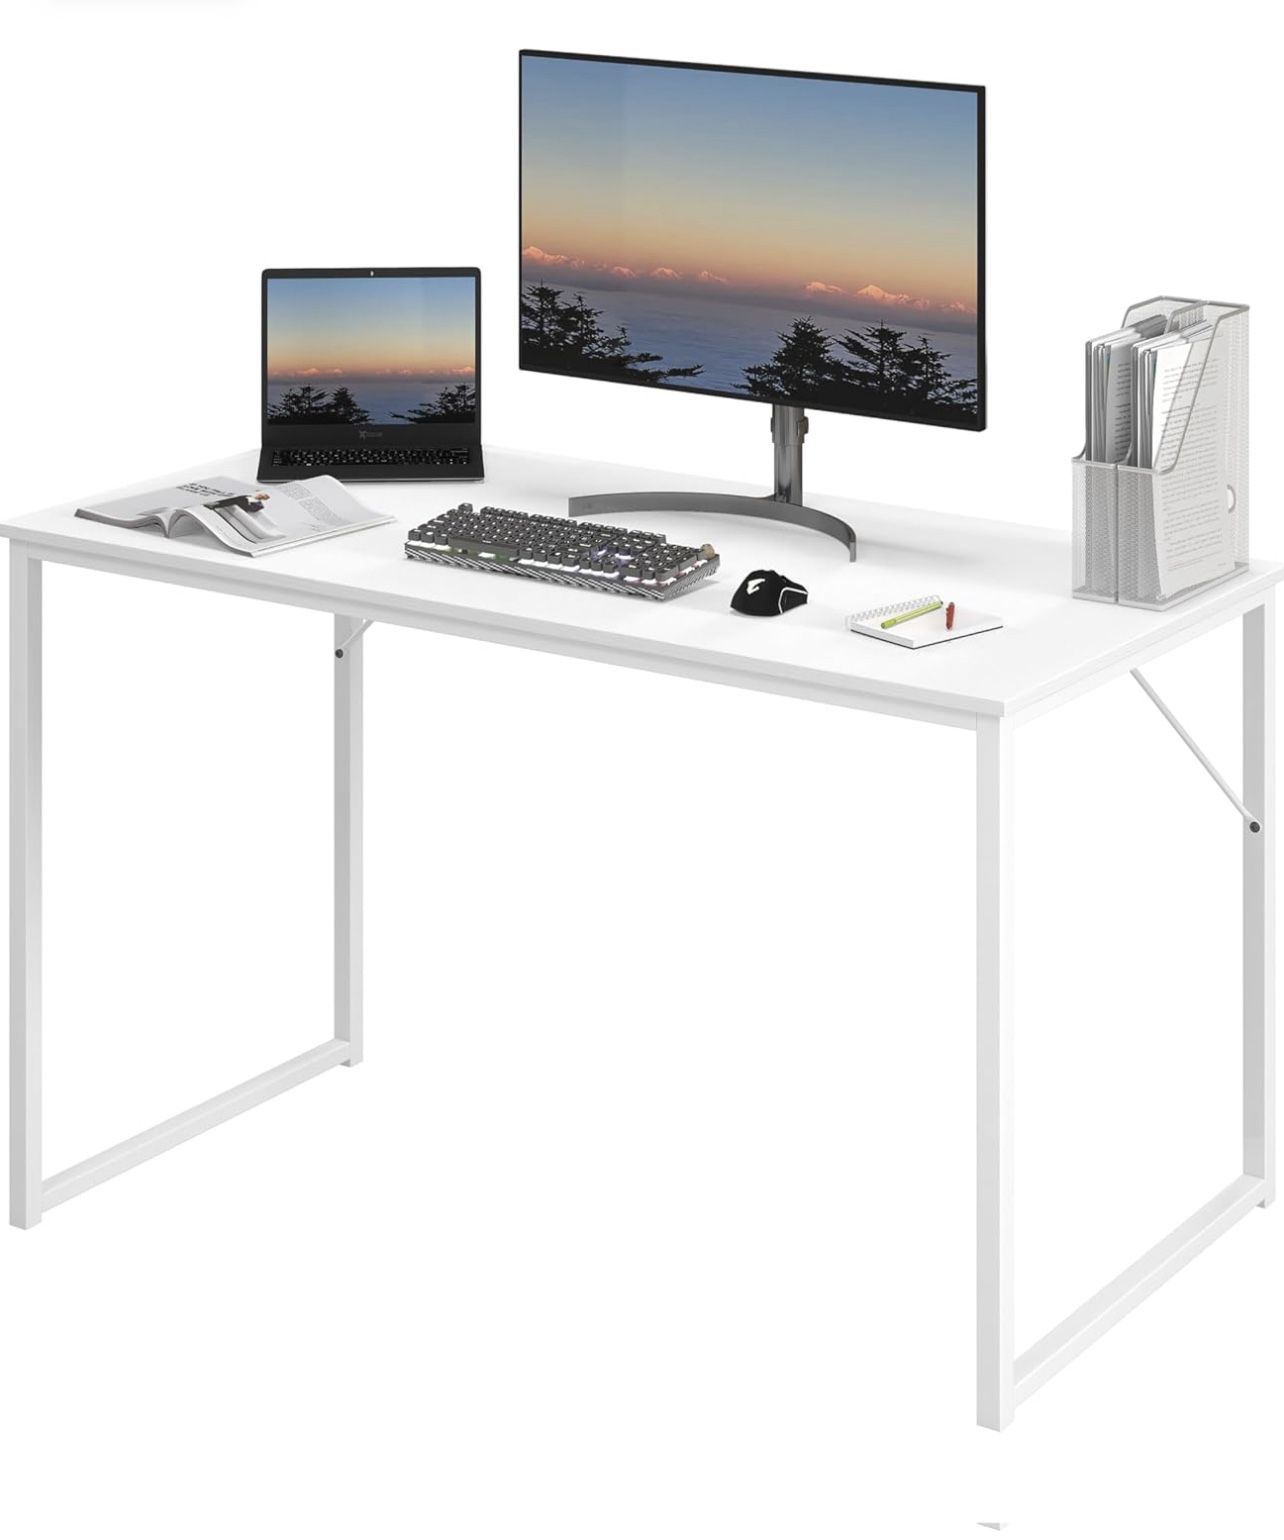 40 inch Computer Desk,Compact Simple PC Laptop Office Study Writing Table Workstation Dining Gaming Desk for Home Office Bedroom,White